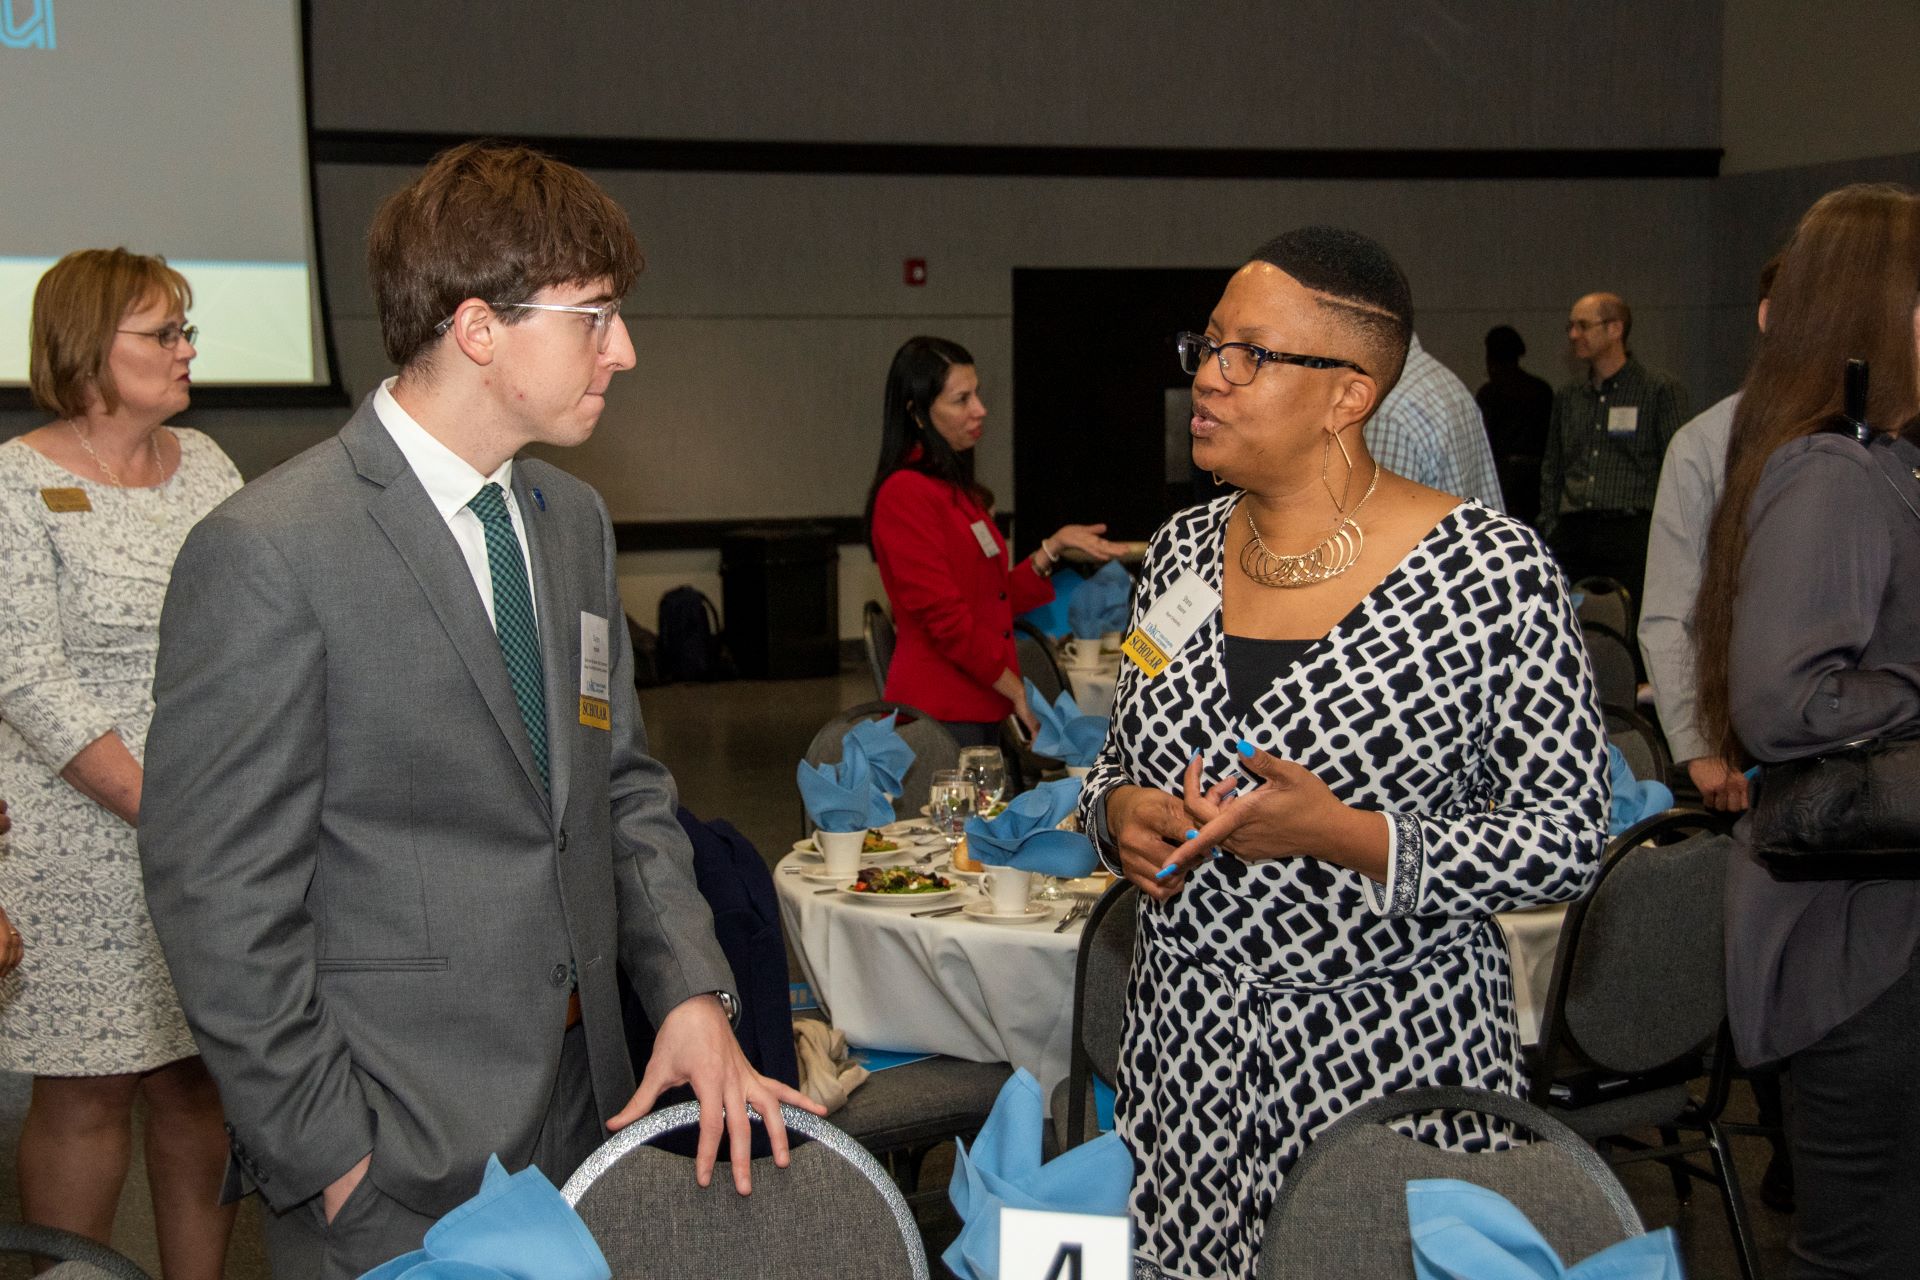 two-scholarship-recipients-speak-to-each-other-standing-by-a-table-at-the-donors-luncheon.jpg